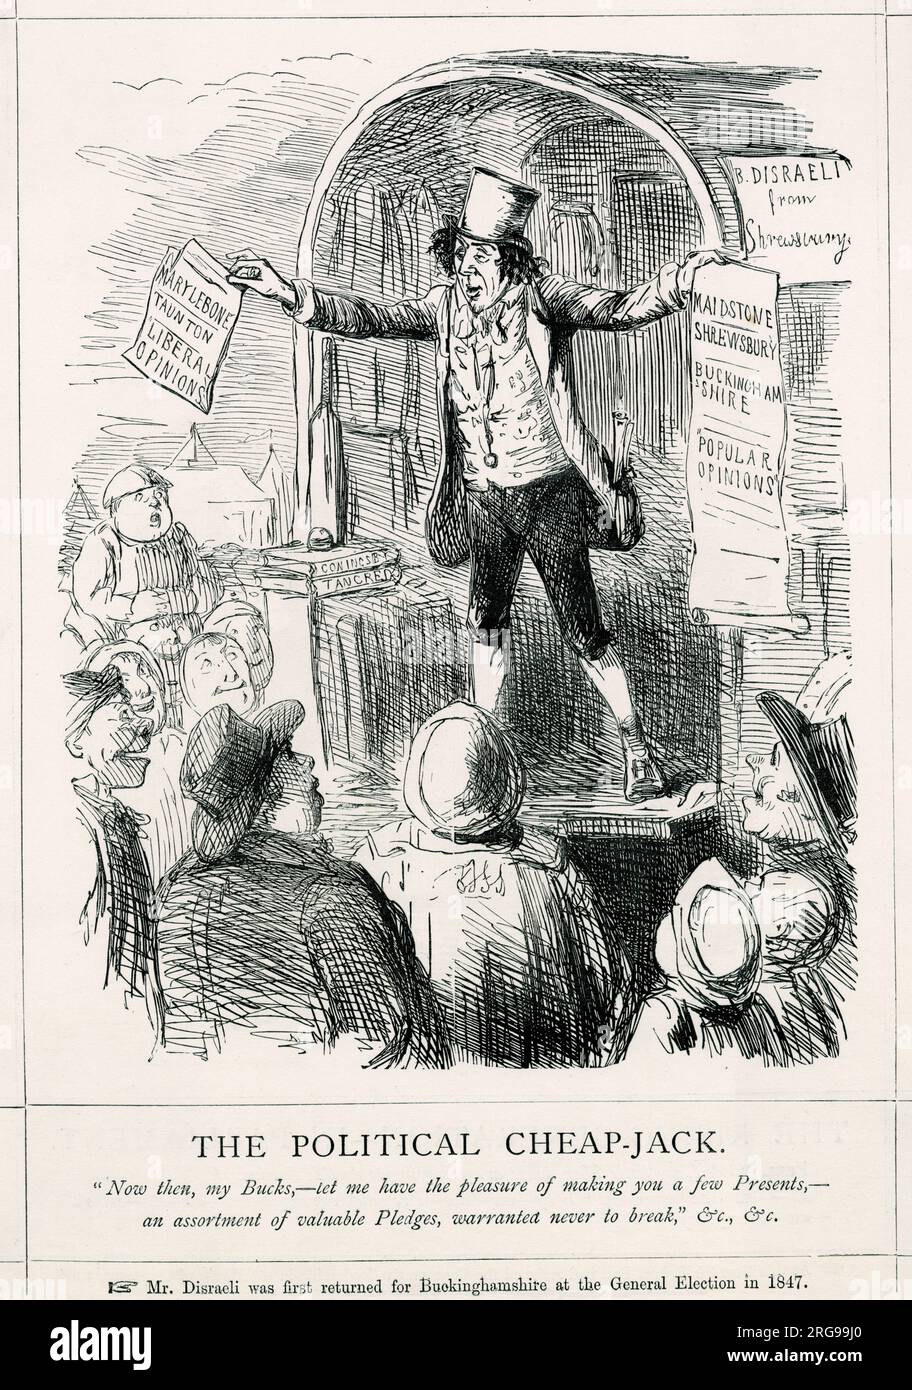 Cartoon, The Political Cheap-Jack -- Benjamin Disraeli, portrayed as a conman at a country fair, wooing his Buckinghamshire constituents during the General Election campaign, summer 1847. Stock Photo